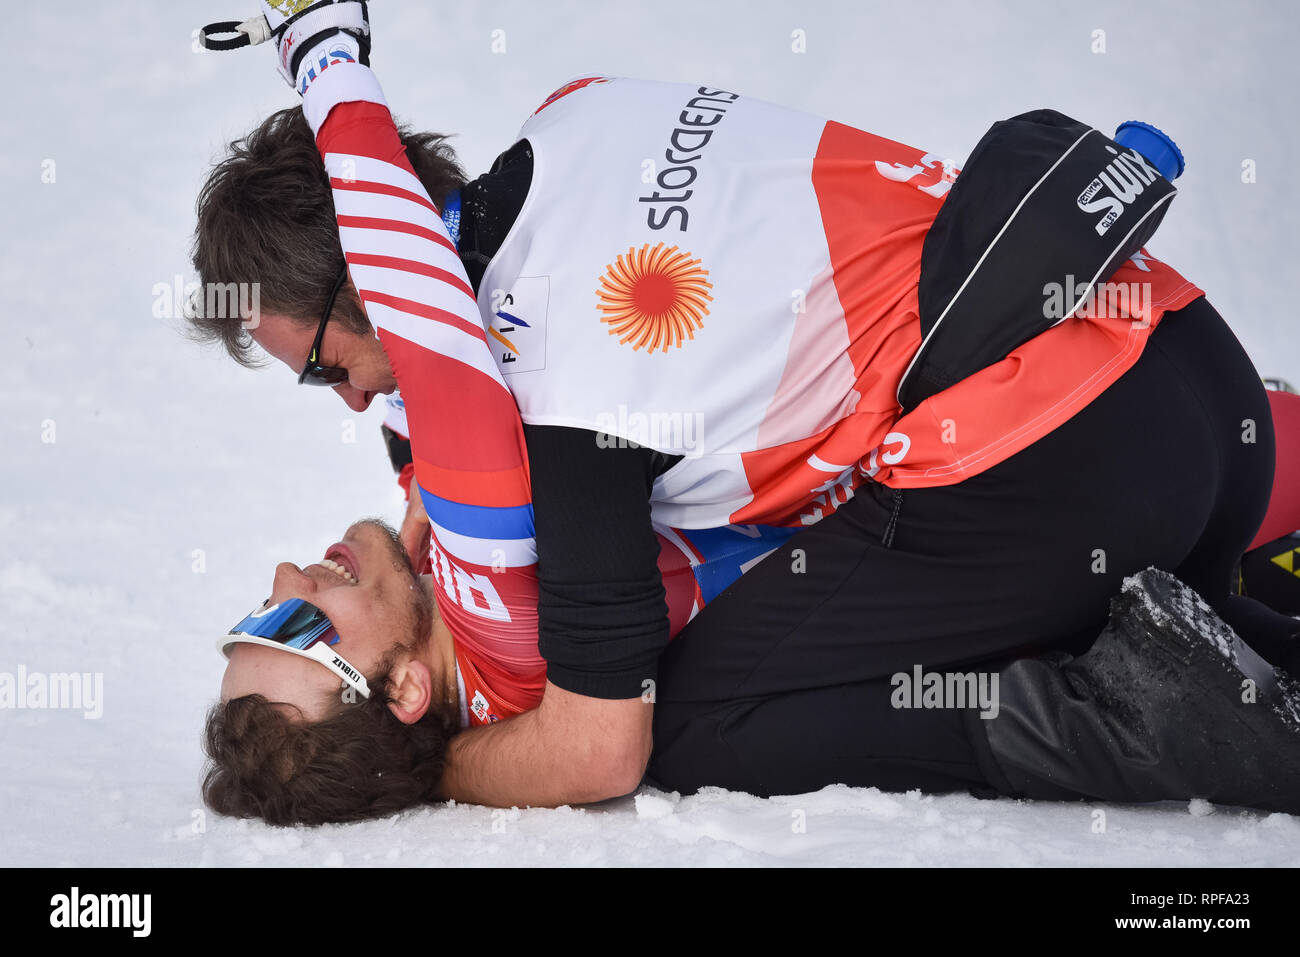 Seefeld, Austria. 21st Feb, 2019. Gleb Retivykh of Russia gets a hug from a coach at the finish line after finishing third in the men's 1.6-k freestyle sprint race at the 2019 world nordic ski championships. Credit: John Lazenby/Alamy Live News Stock Photo